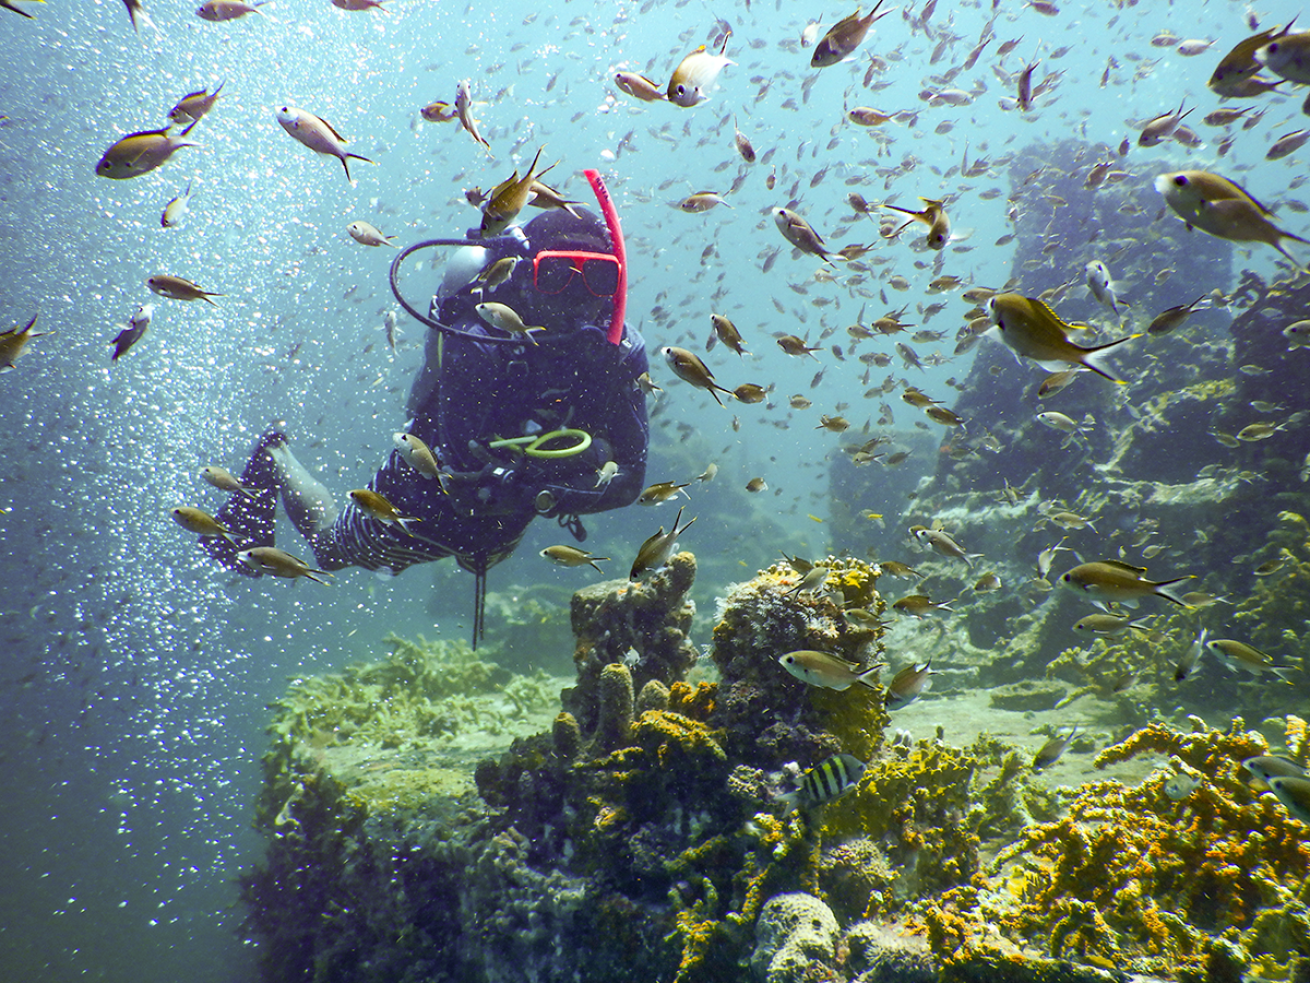 Diver swimming with a school of fish.